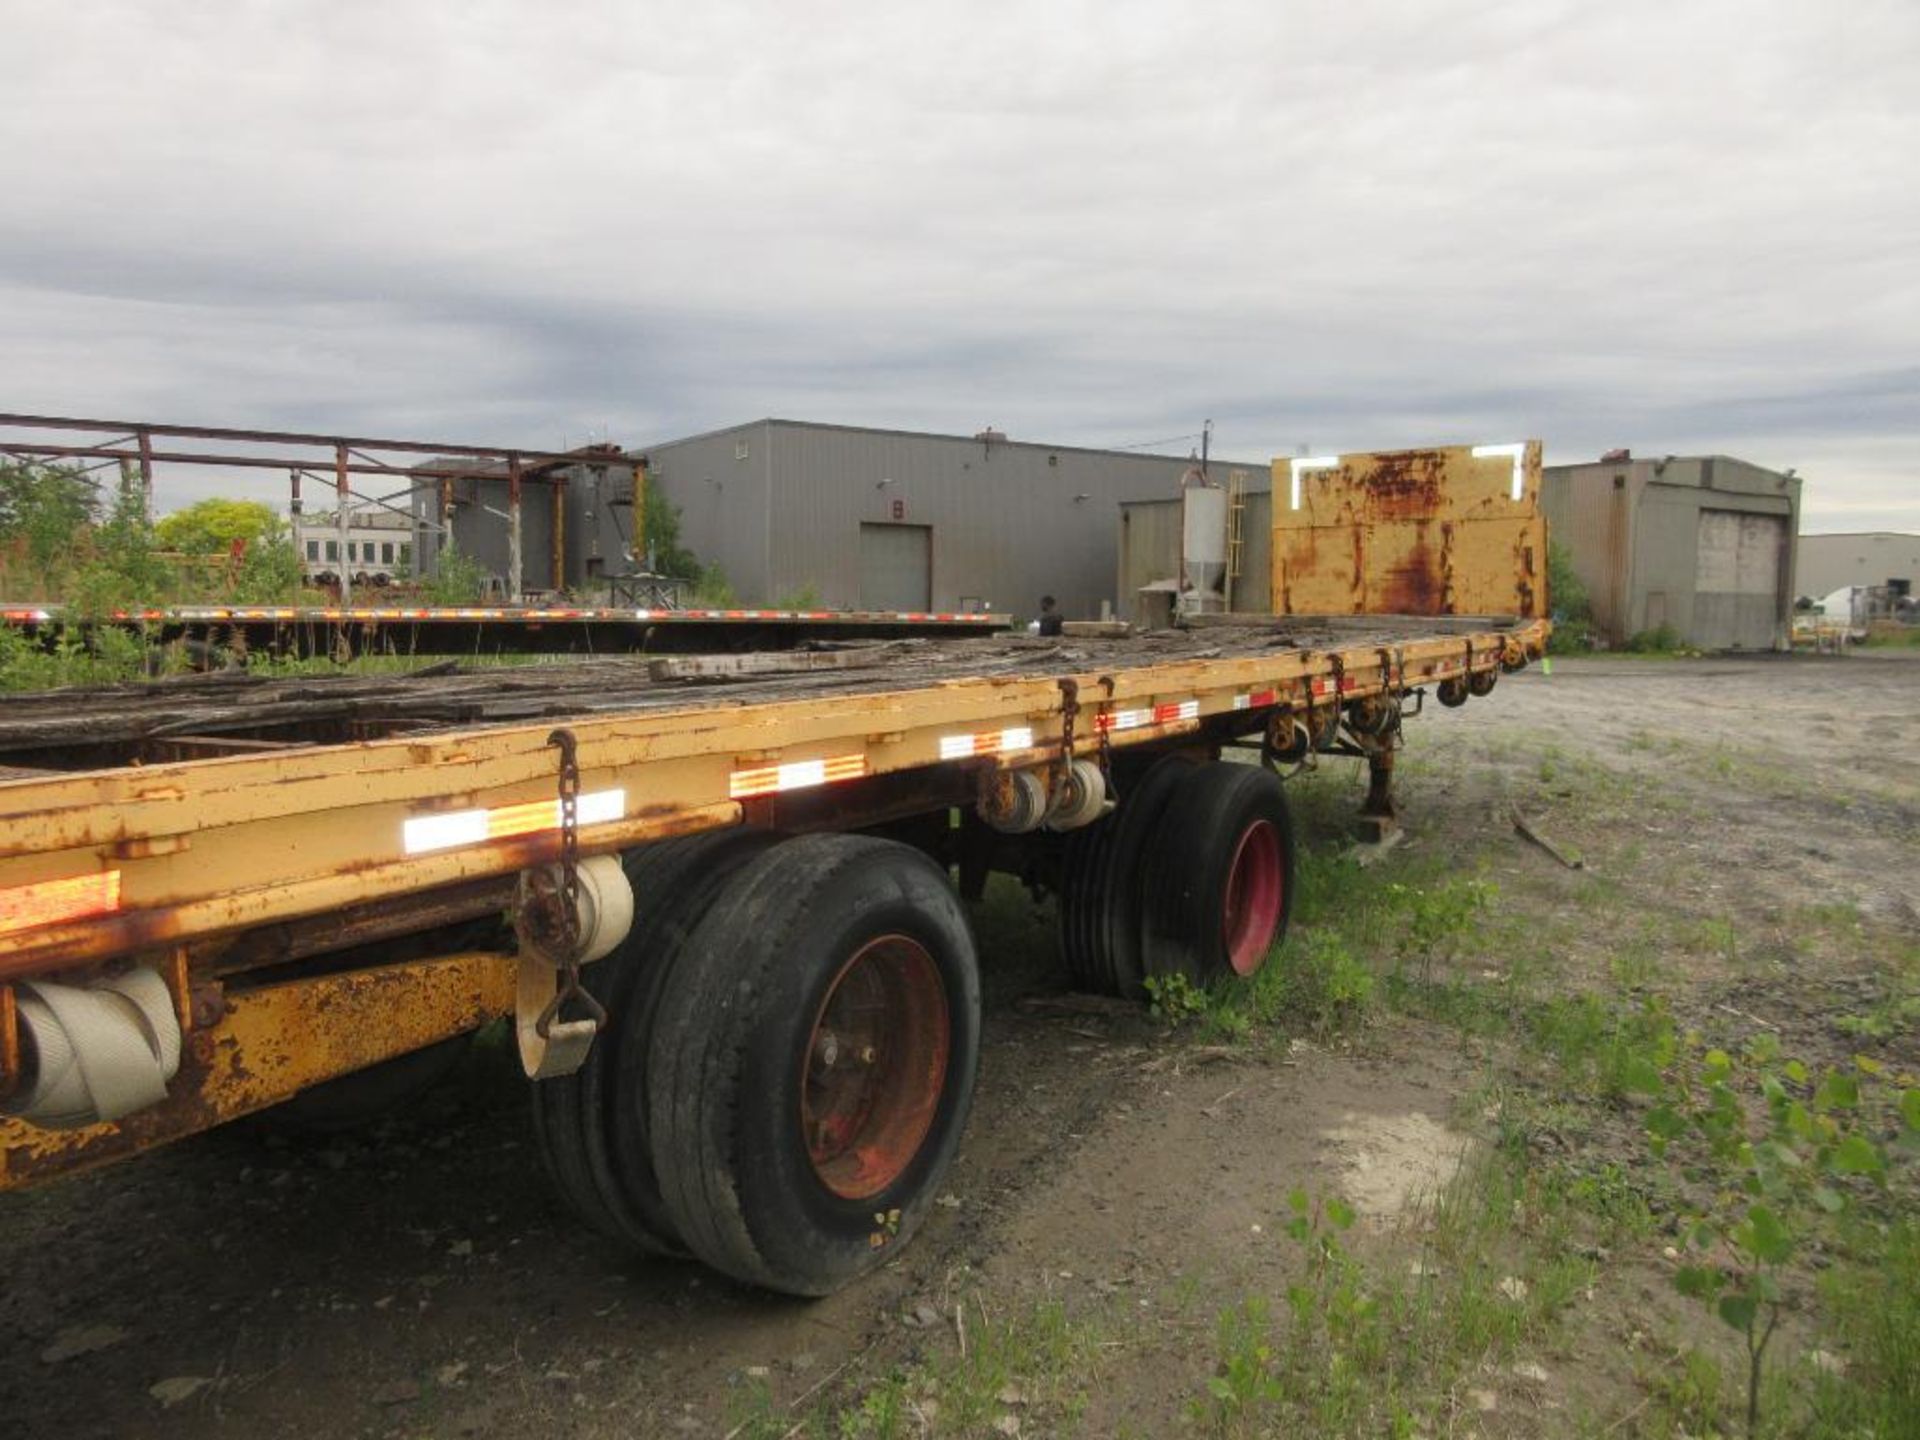 1967 CANCAR, 44' TRAILER, VIN 671026 (NORTH WEST YARD) *AUCTIONEER'S NOTE: YARD TRAILER, NO OWNERSHI - Image 5 of 10